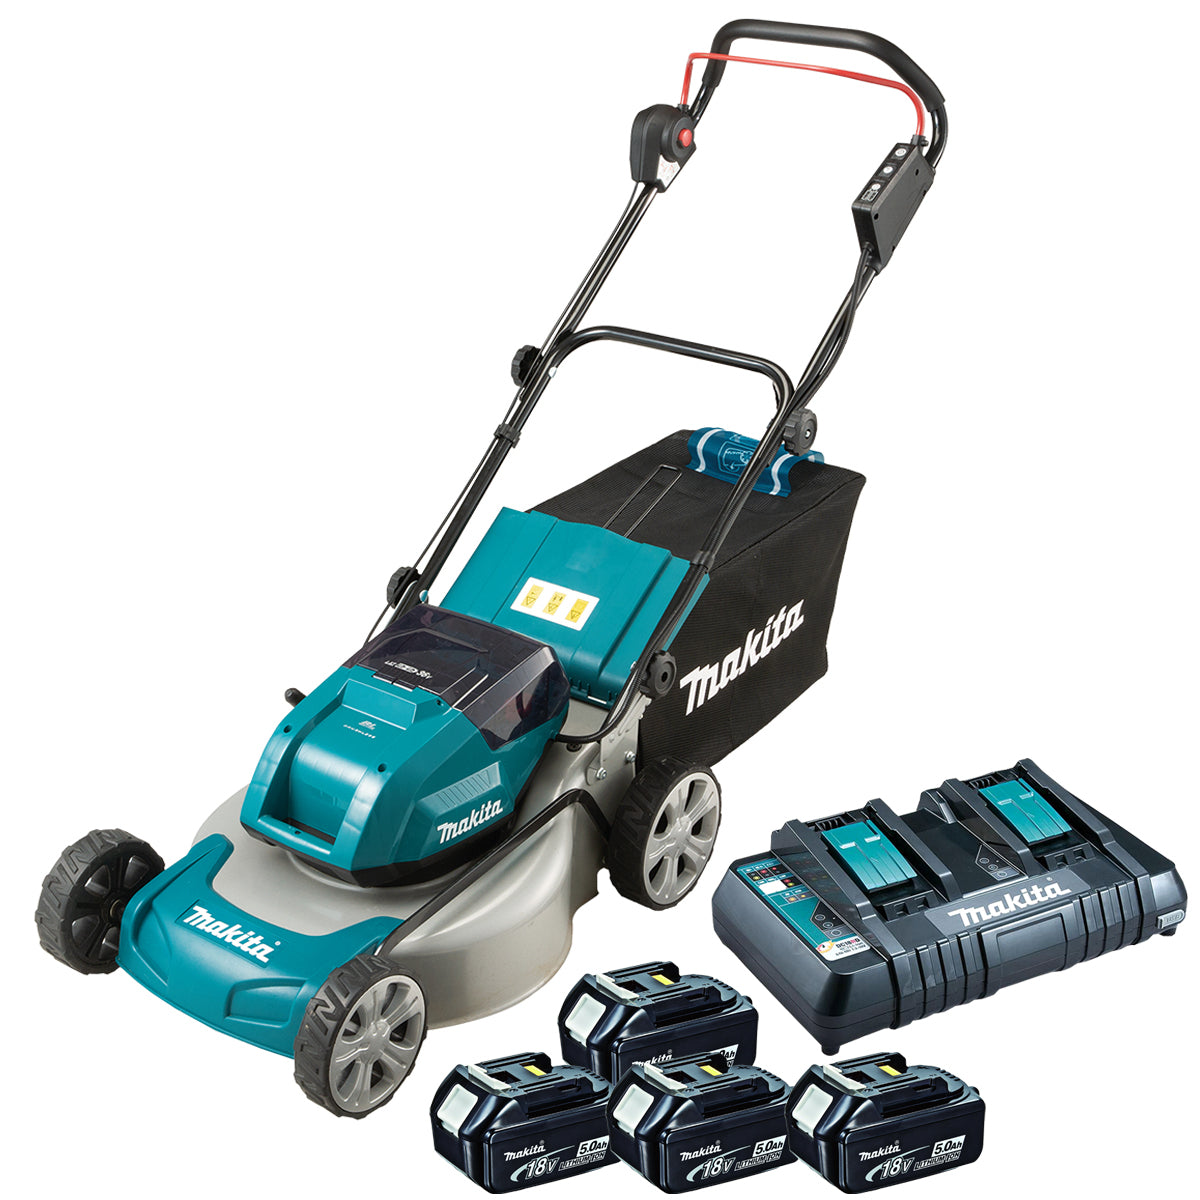 Makita DLM460PT4 36V LXT Brushless 460mm Lawn Mower With 4 x 5.0Ah Batteries & Charger